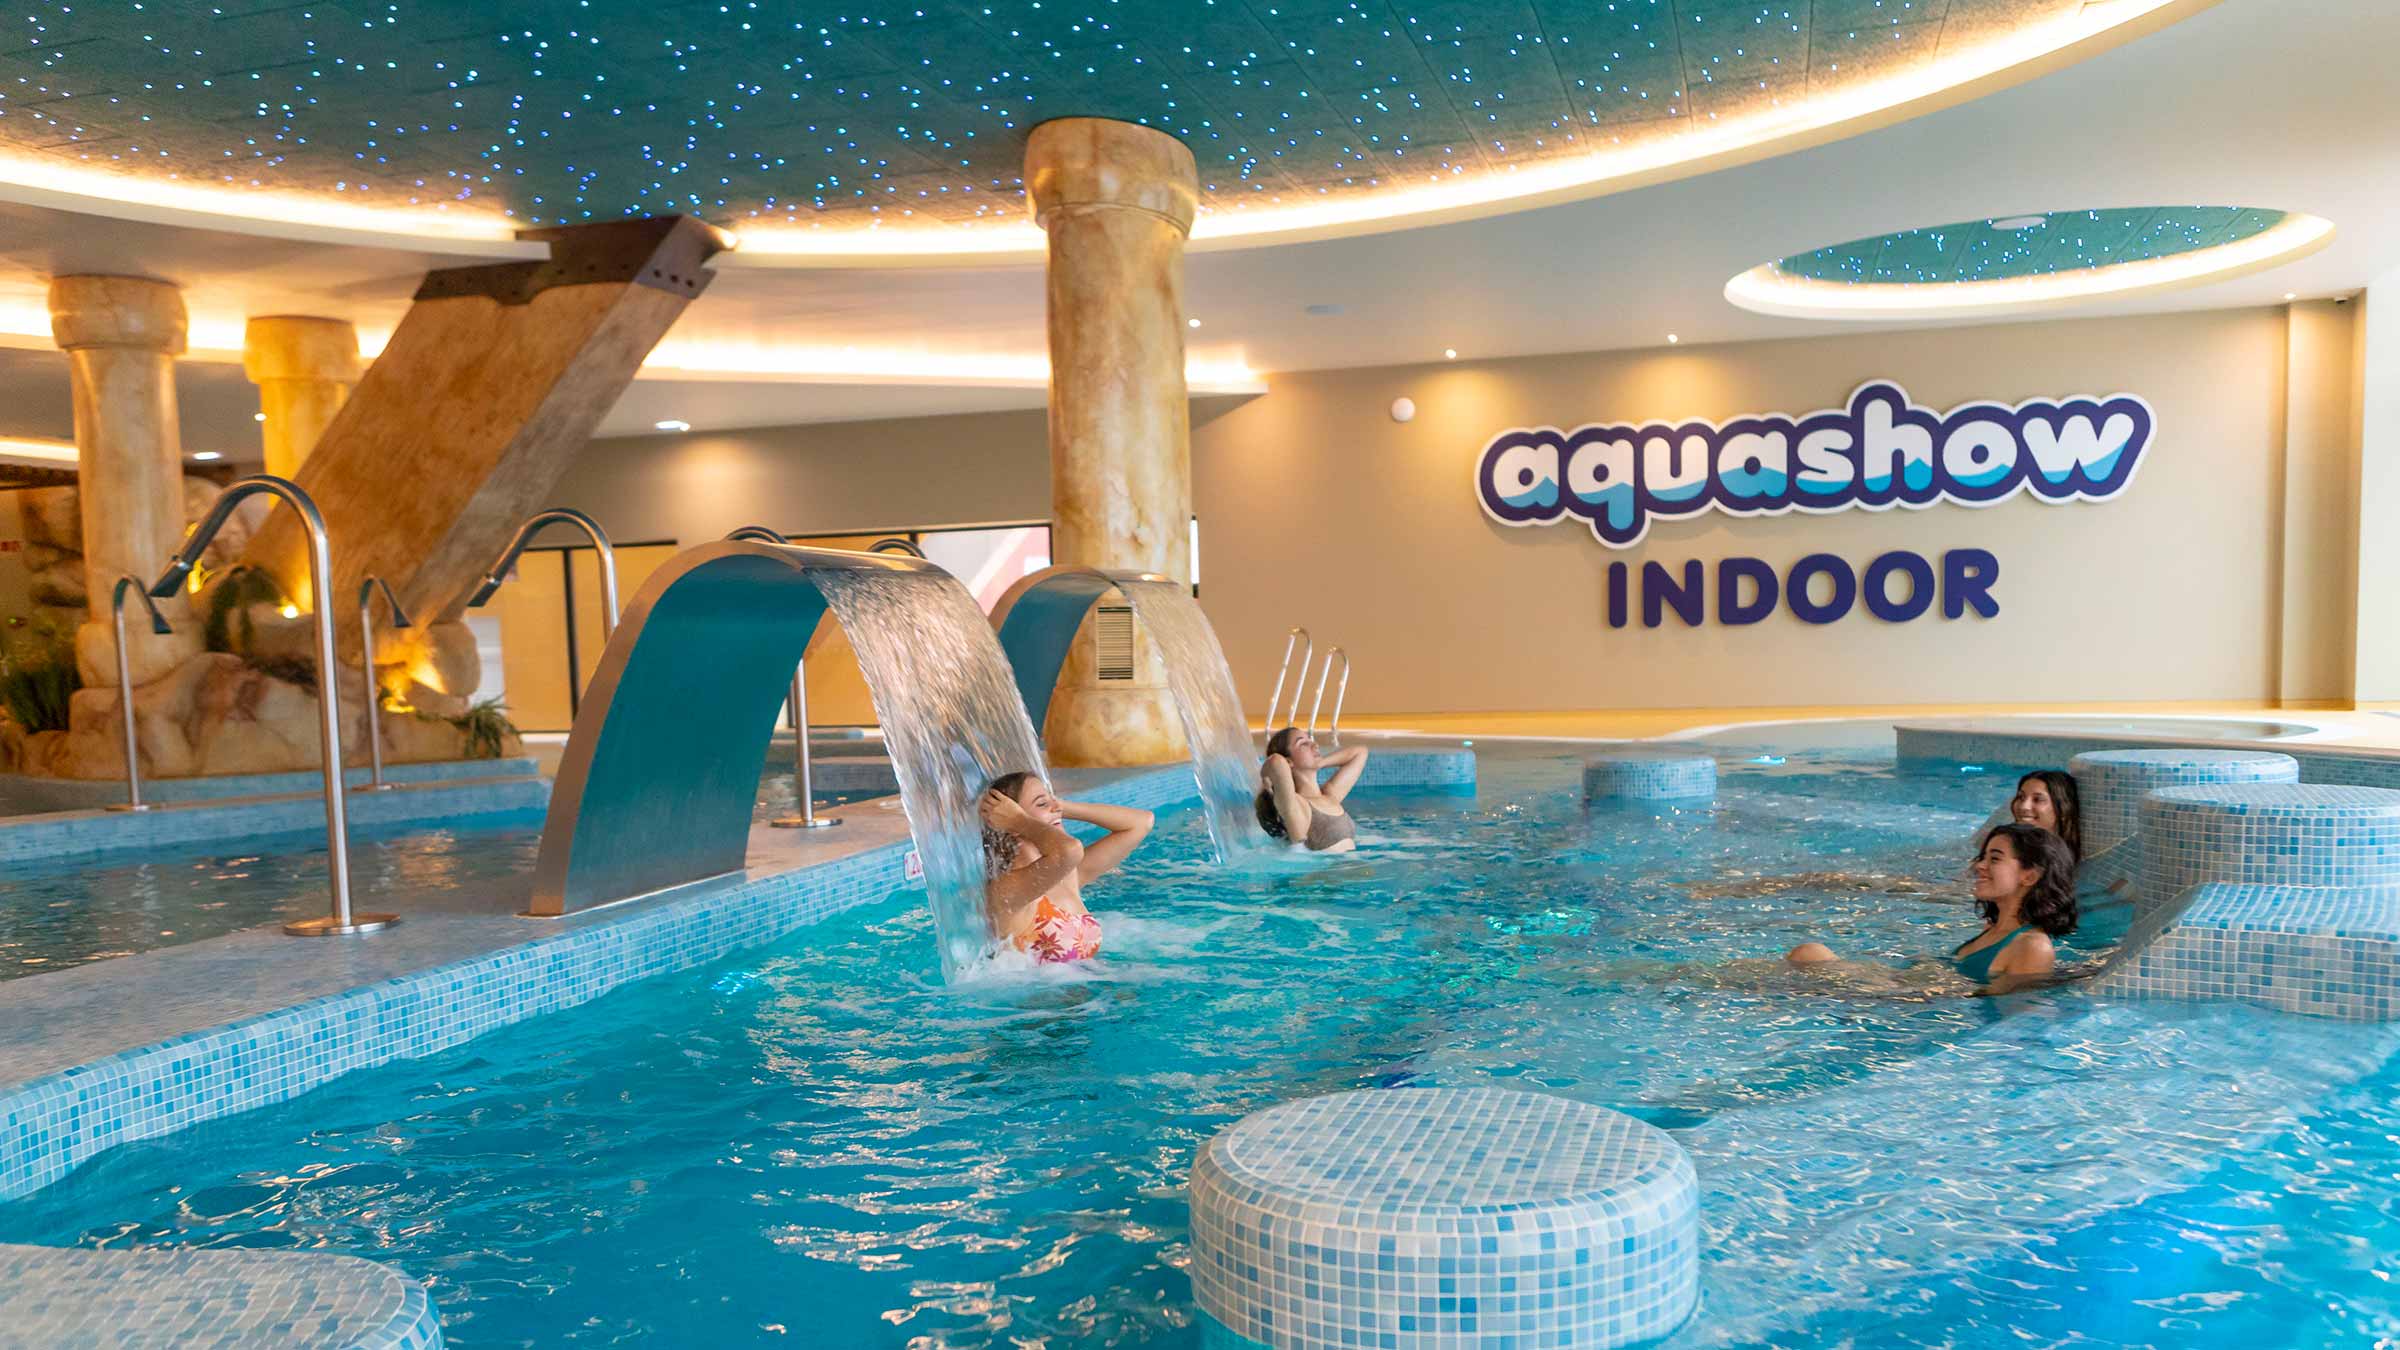 Opening of Aquashow Indoor, a first in leisure and tourism, Portugal